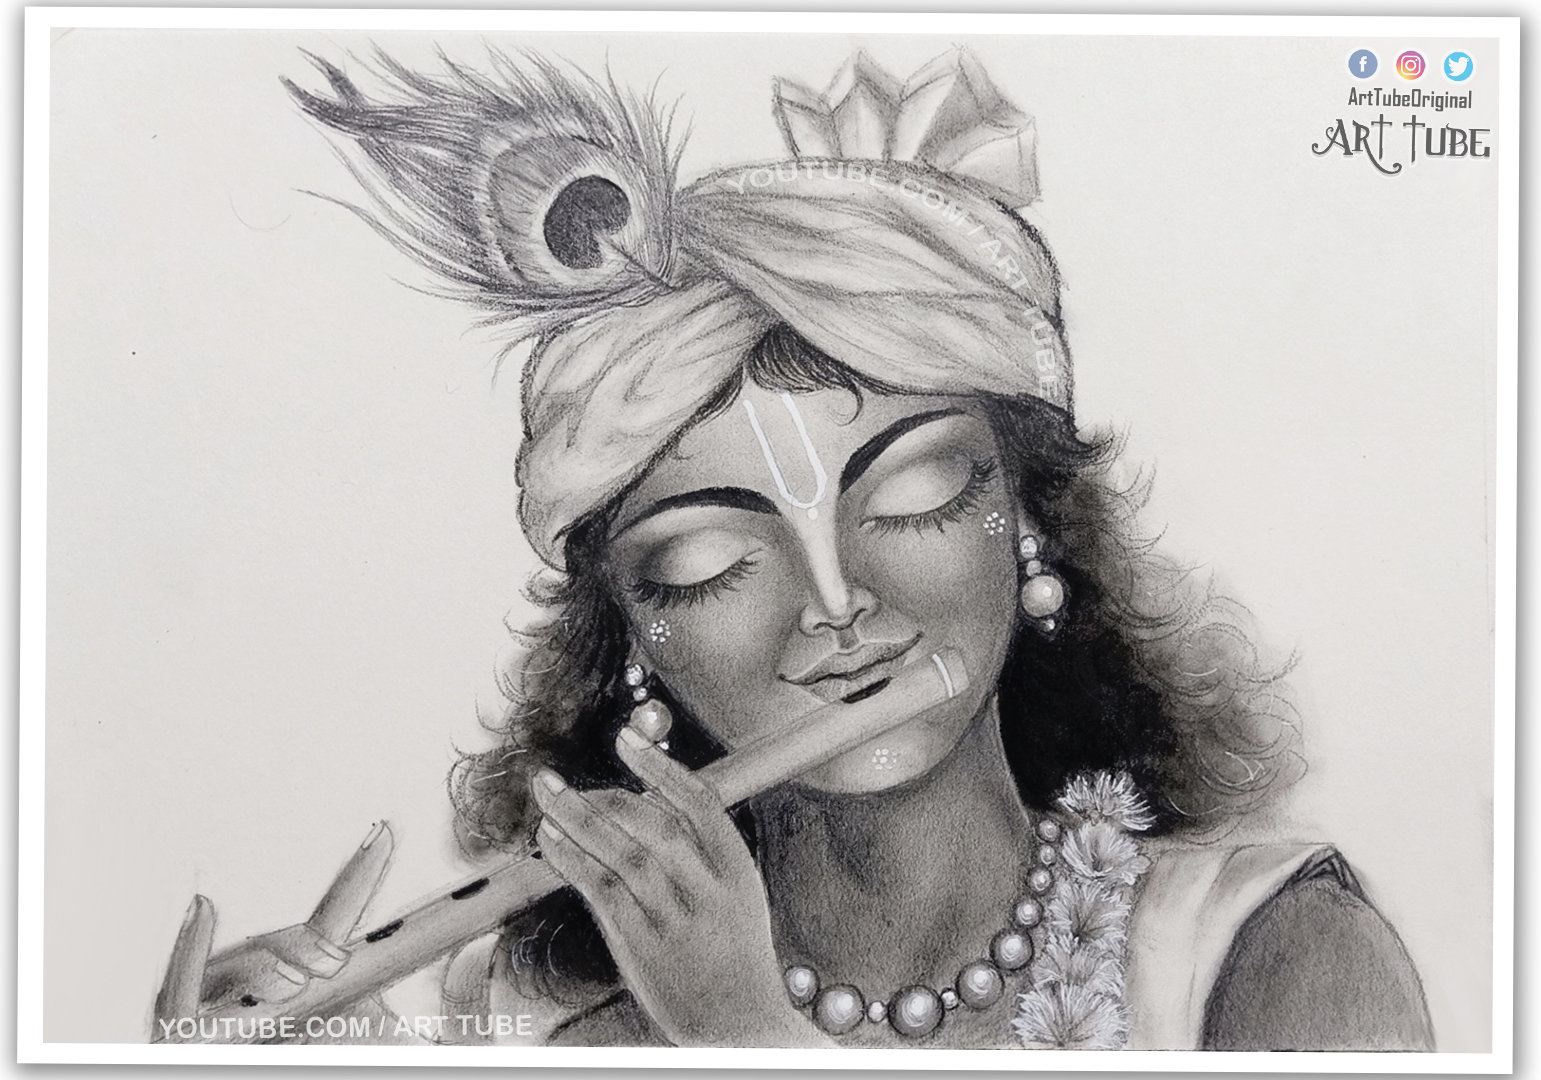 Love in Monochrome: Black and White Pencil Art Print of Radha and Kris